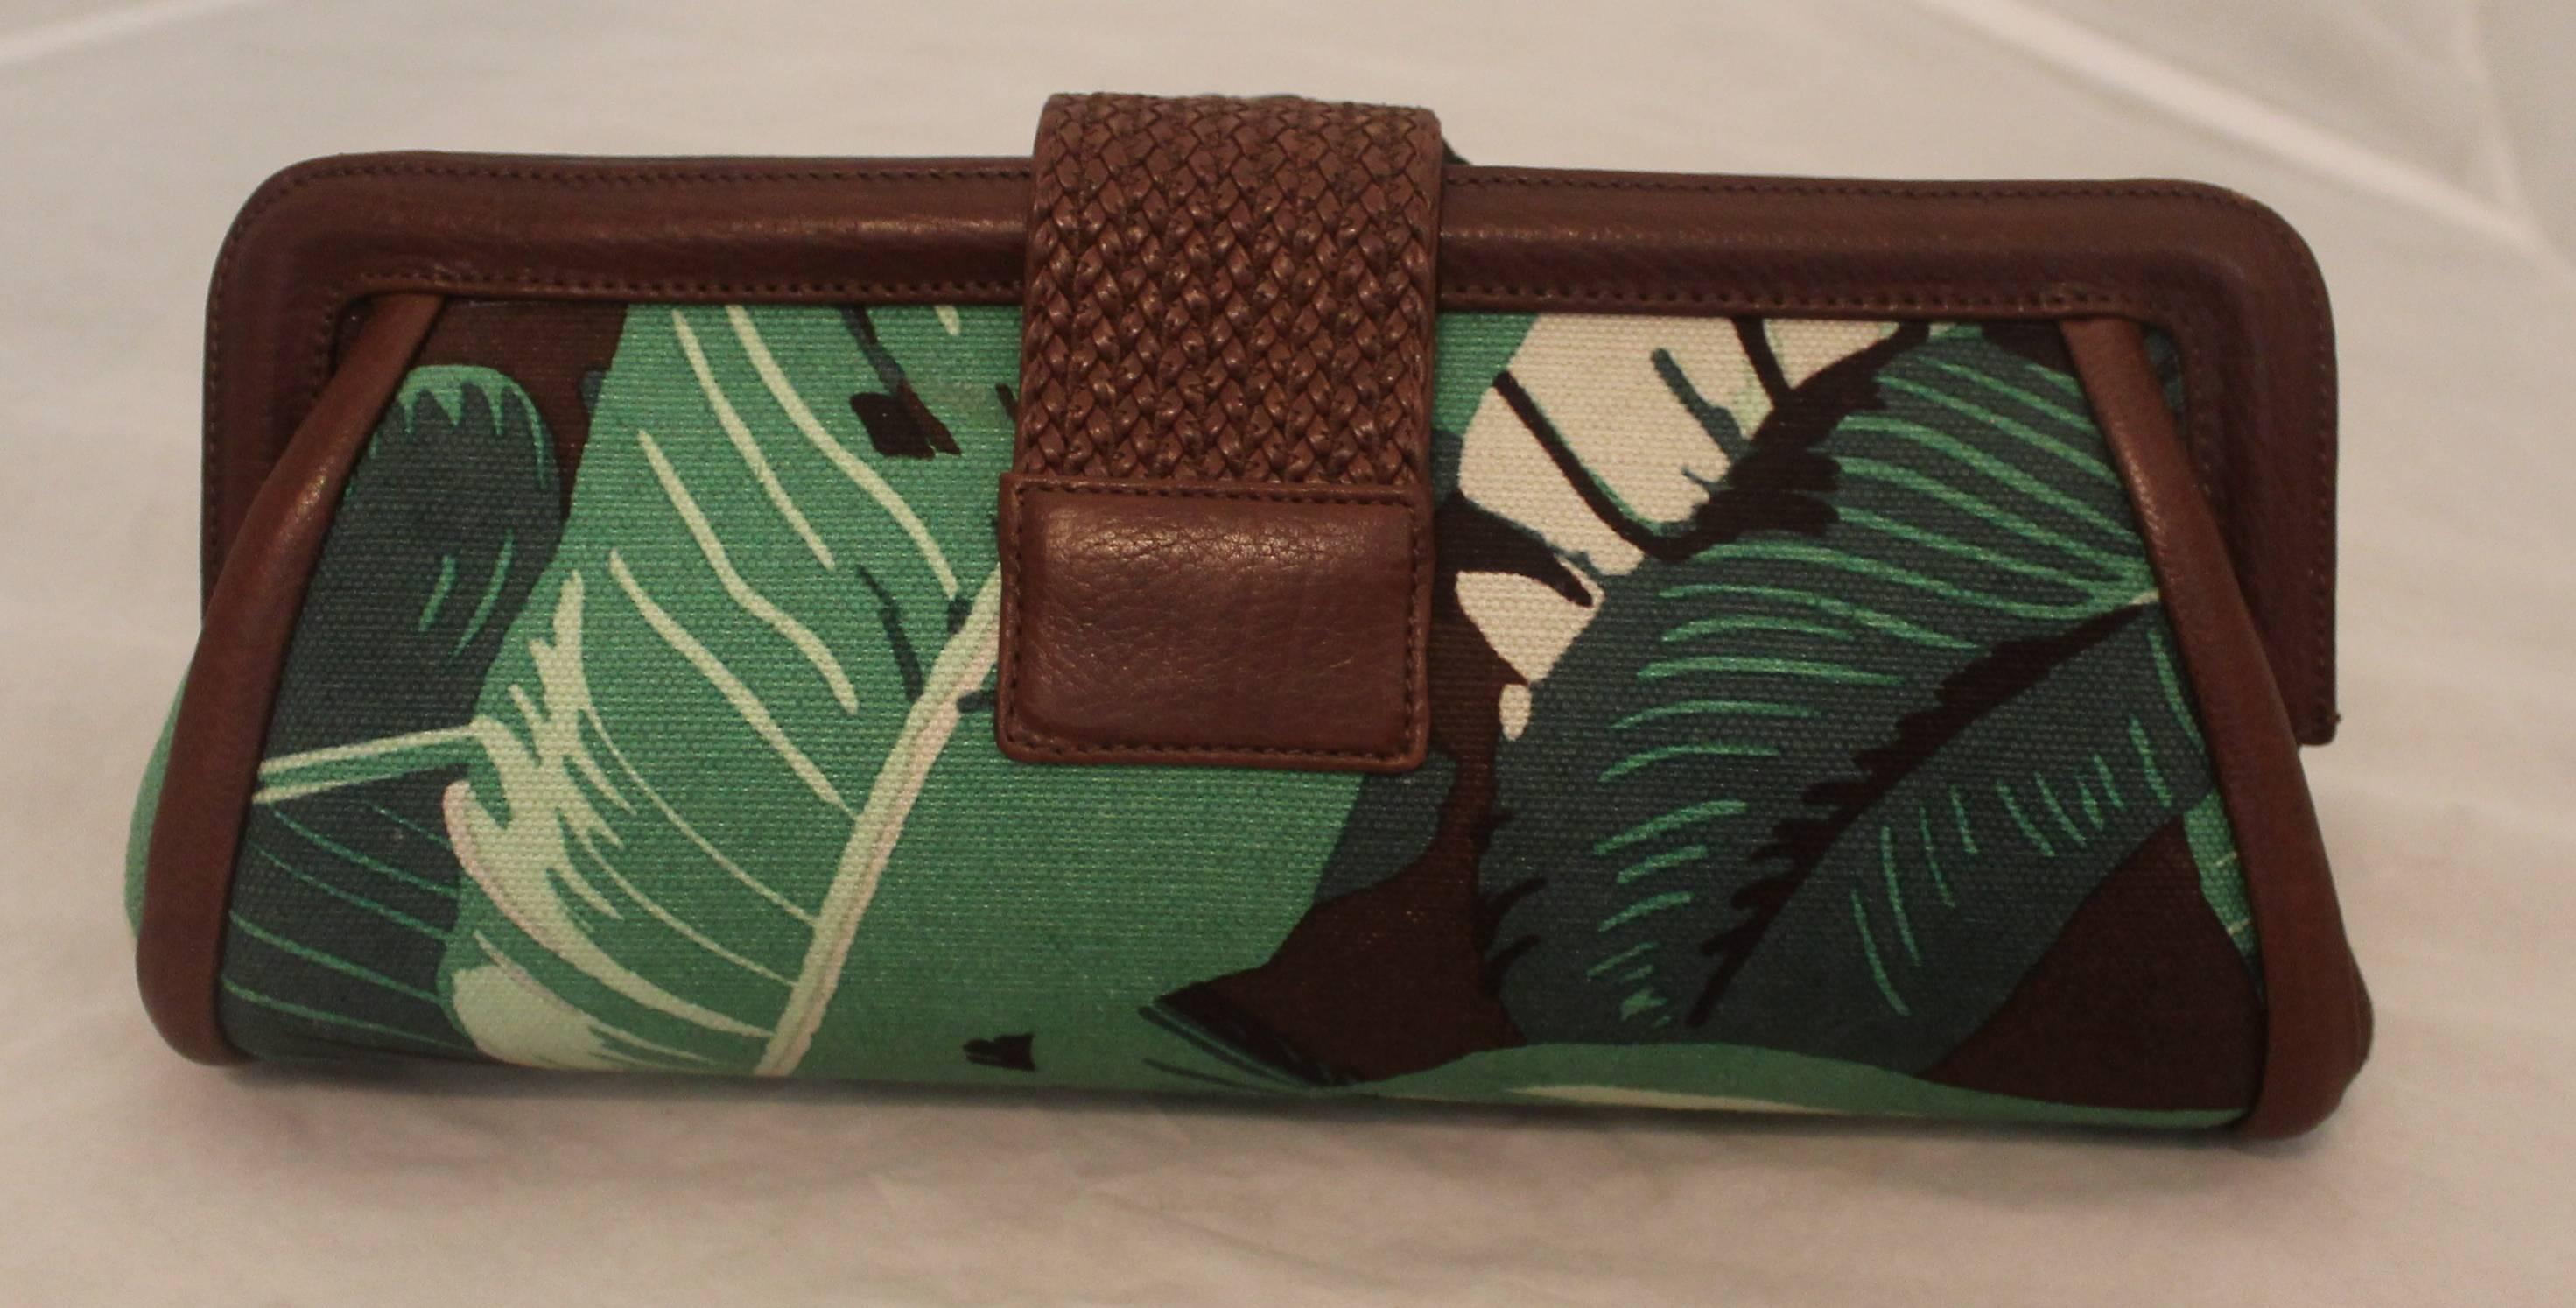 Michael Kors Green & Brown Tropical Print Clutch. This piece is in excellent condition and is perfect for the summer! There is a braided front lock with leather trim. The clutch has a gold interior and top zip.

Measurements:
Height- 5